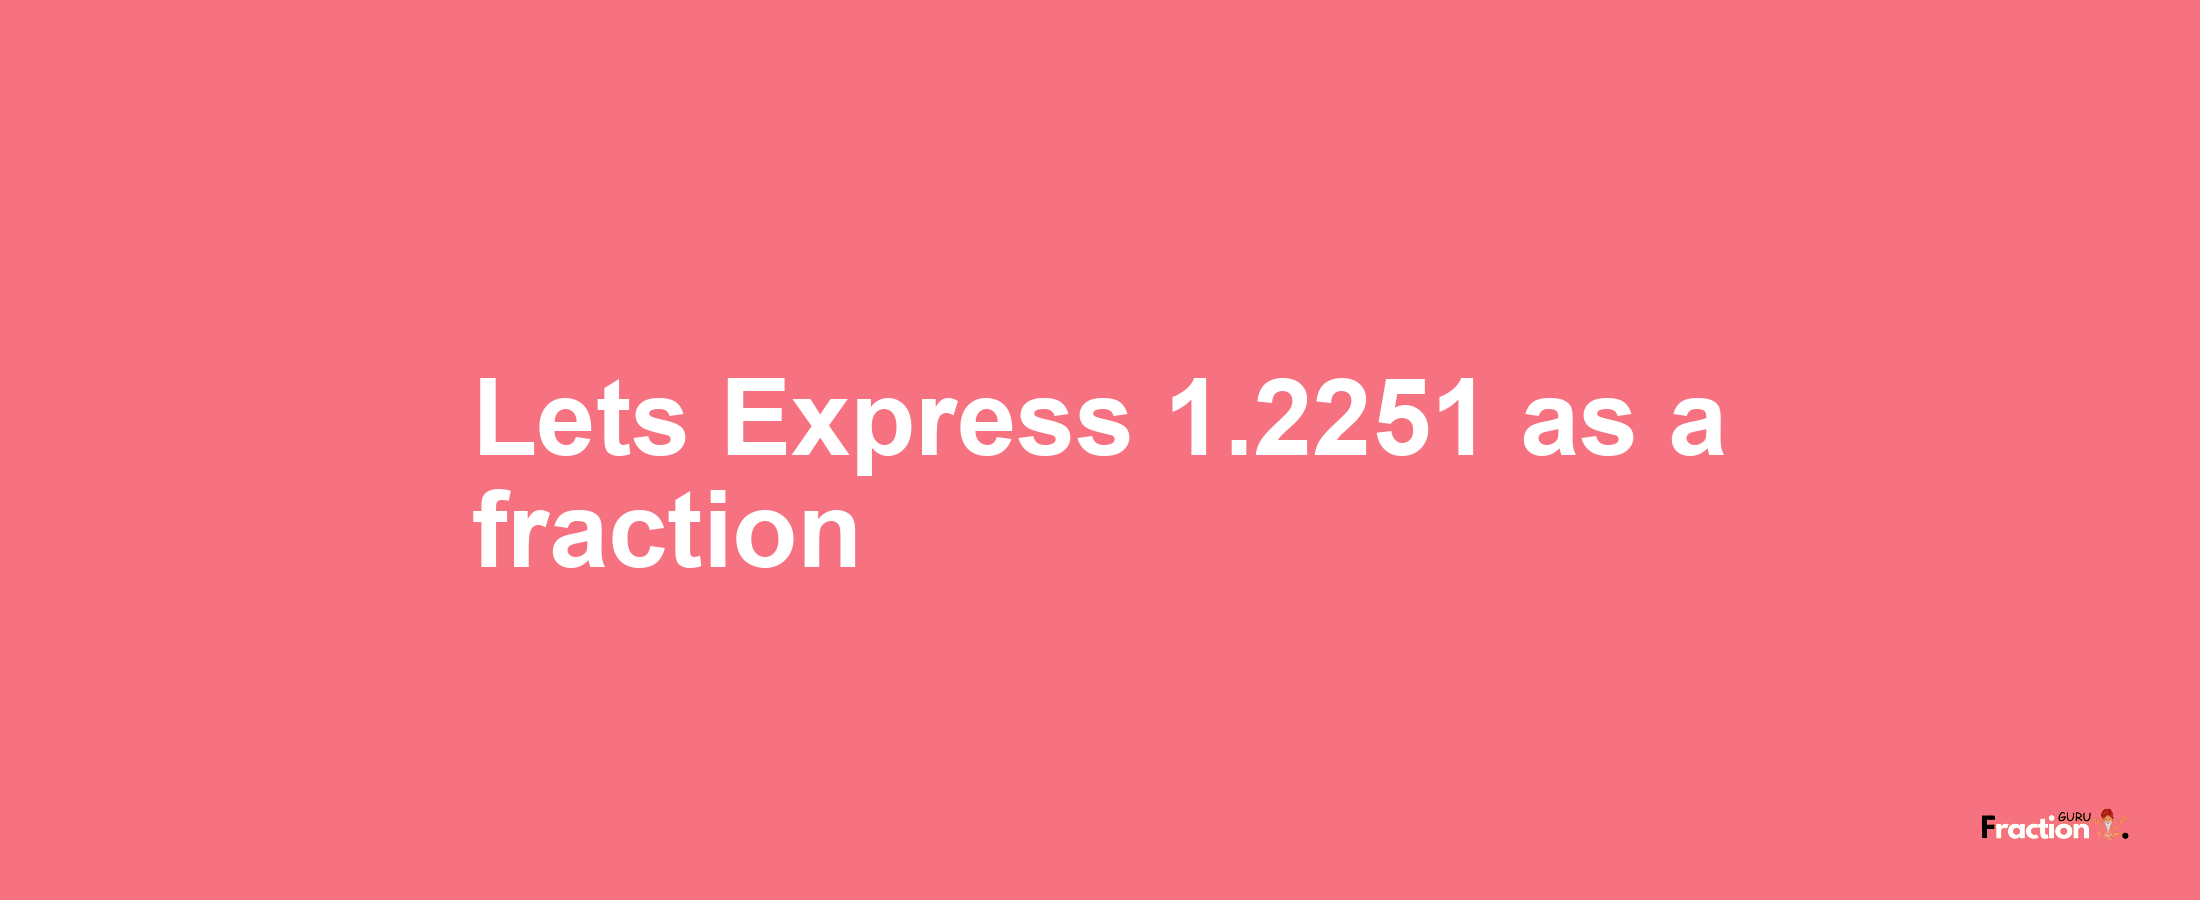 Lets Express 1.2251 as afraction